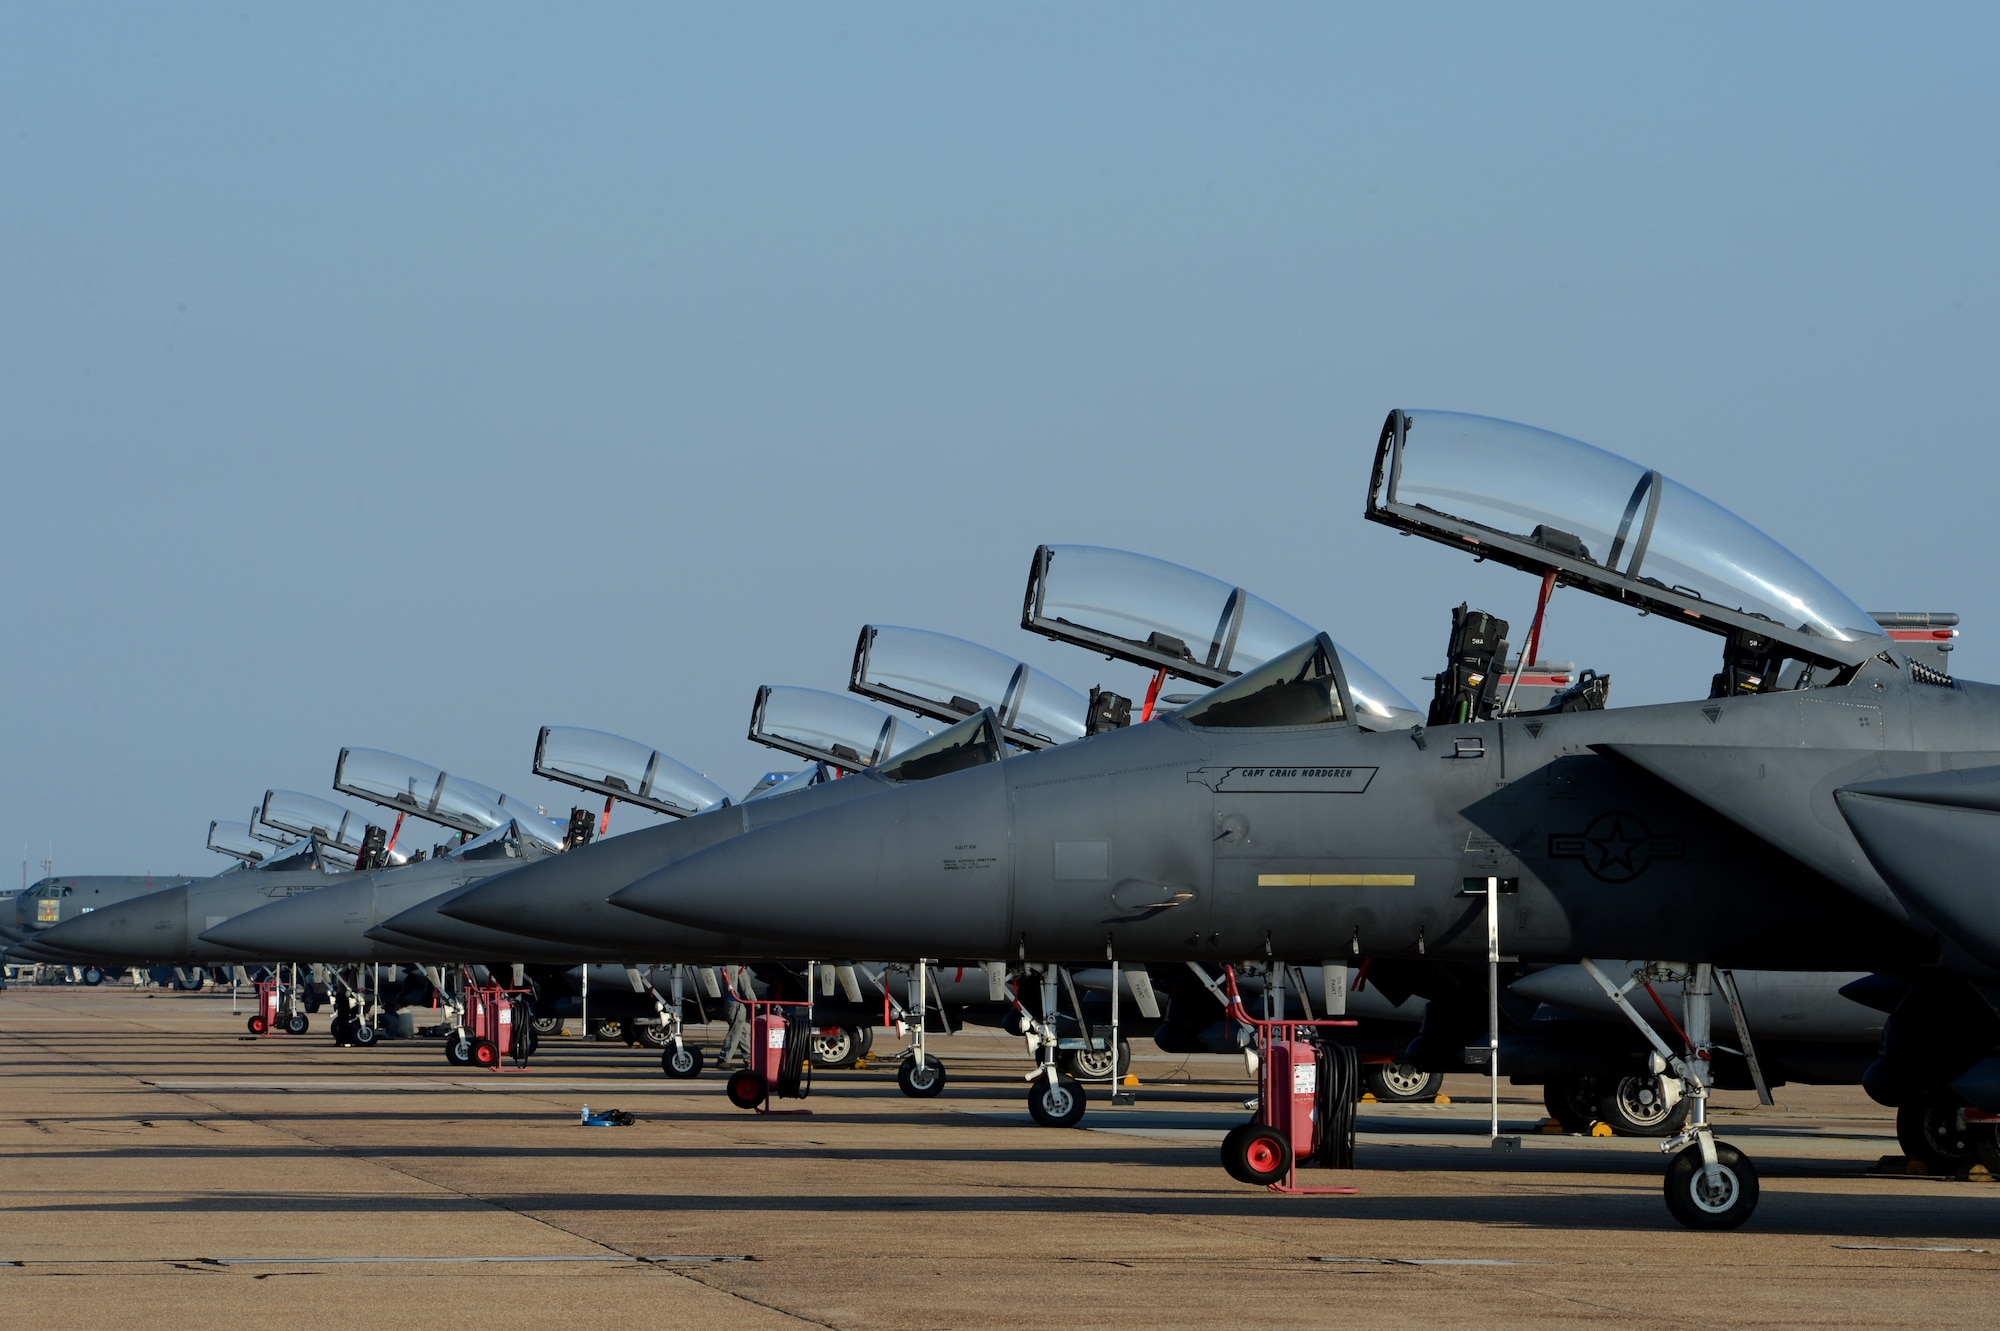 F-15E Strike Eagles assigned to the 4th Fighter Wing at Seymour Johnson Air Force Base, North Carolina, are parked on the flightline at Barksdale Air Force Base, La., Oct. 6, 2015. The Strike Eagles evacuated to Barksdale to escape potential damage caused by Hurricane Joaquin as it hit along the East Coast of the United States. (U.S. Air Force photo/Senior Airman Joseph A. Pagán Jr.)